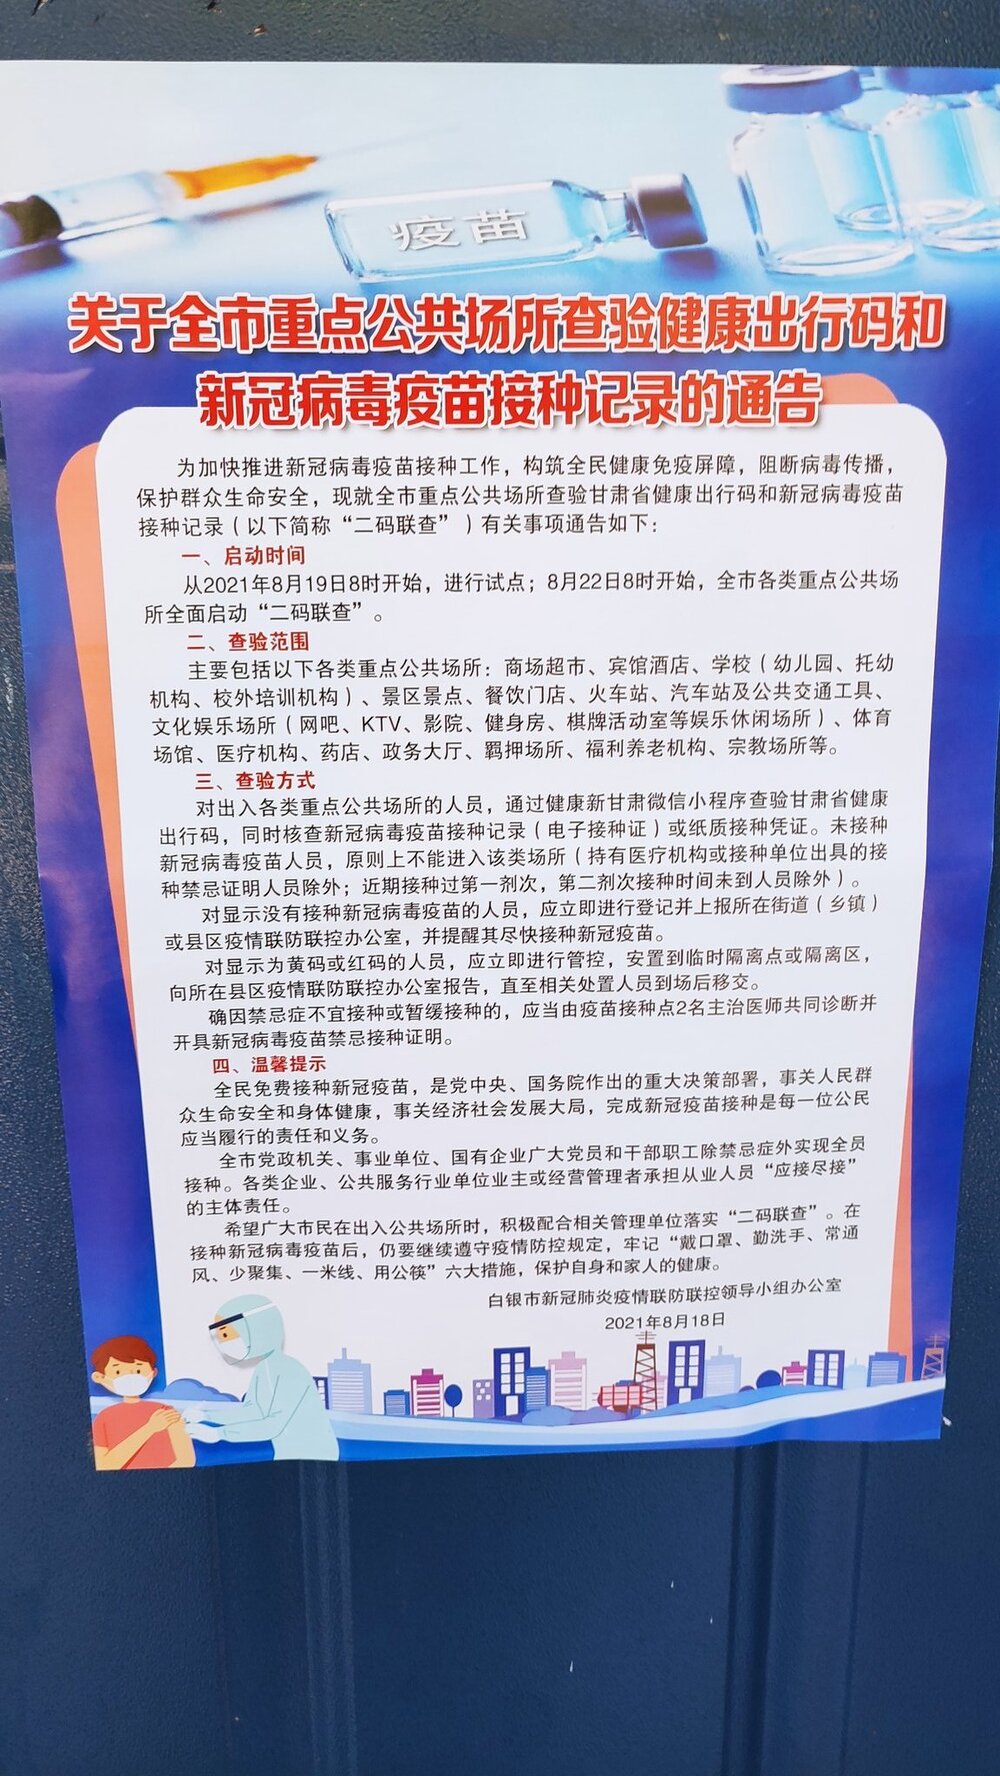 An official notification from Baiyin City, Gangsu Province stipulates that  starting from August 22, all major public places will require people to show their “Health Code '' and “Vaccine Passport ''. Non vaccinated people will be denied entry.